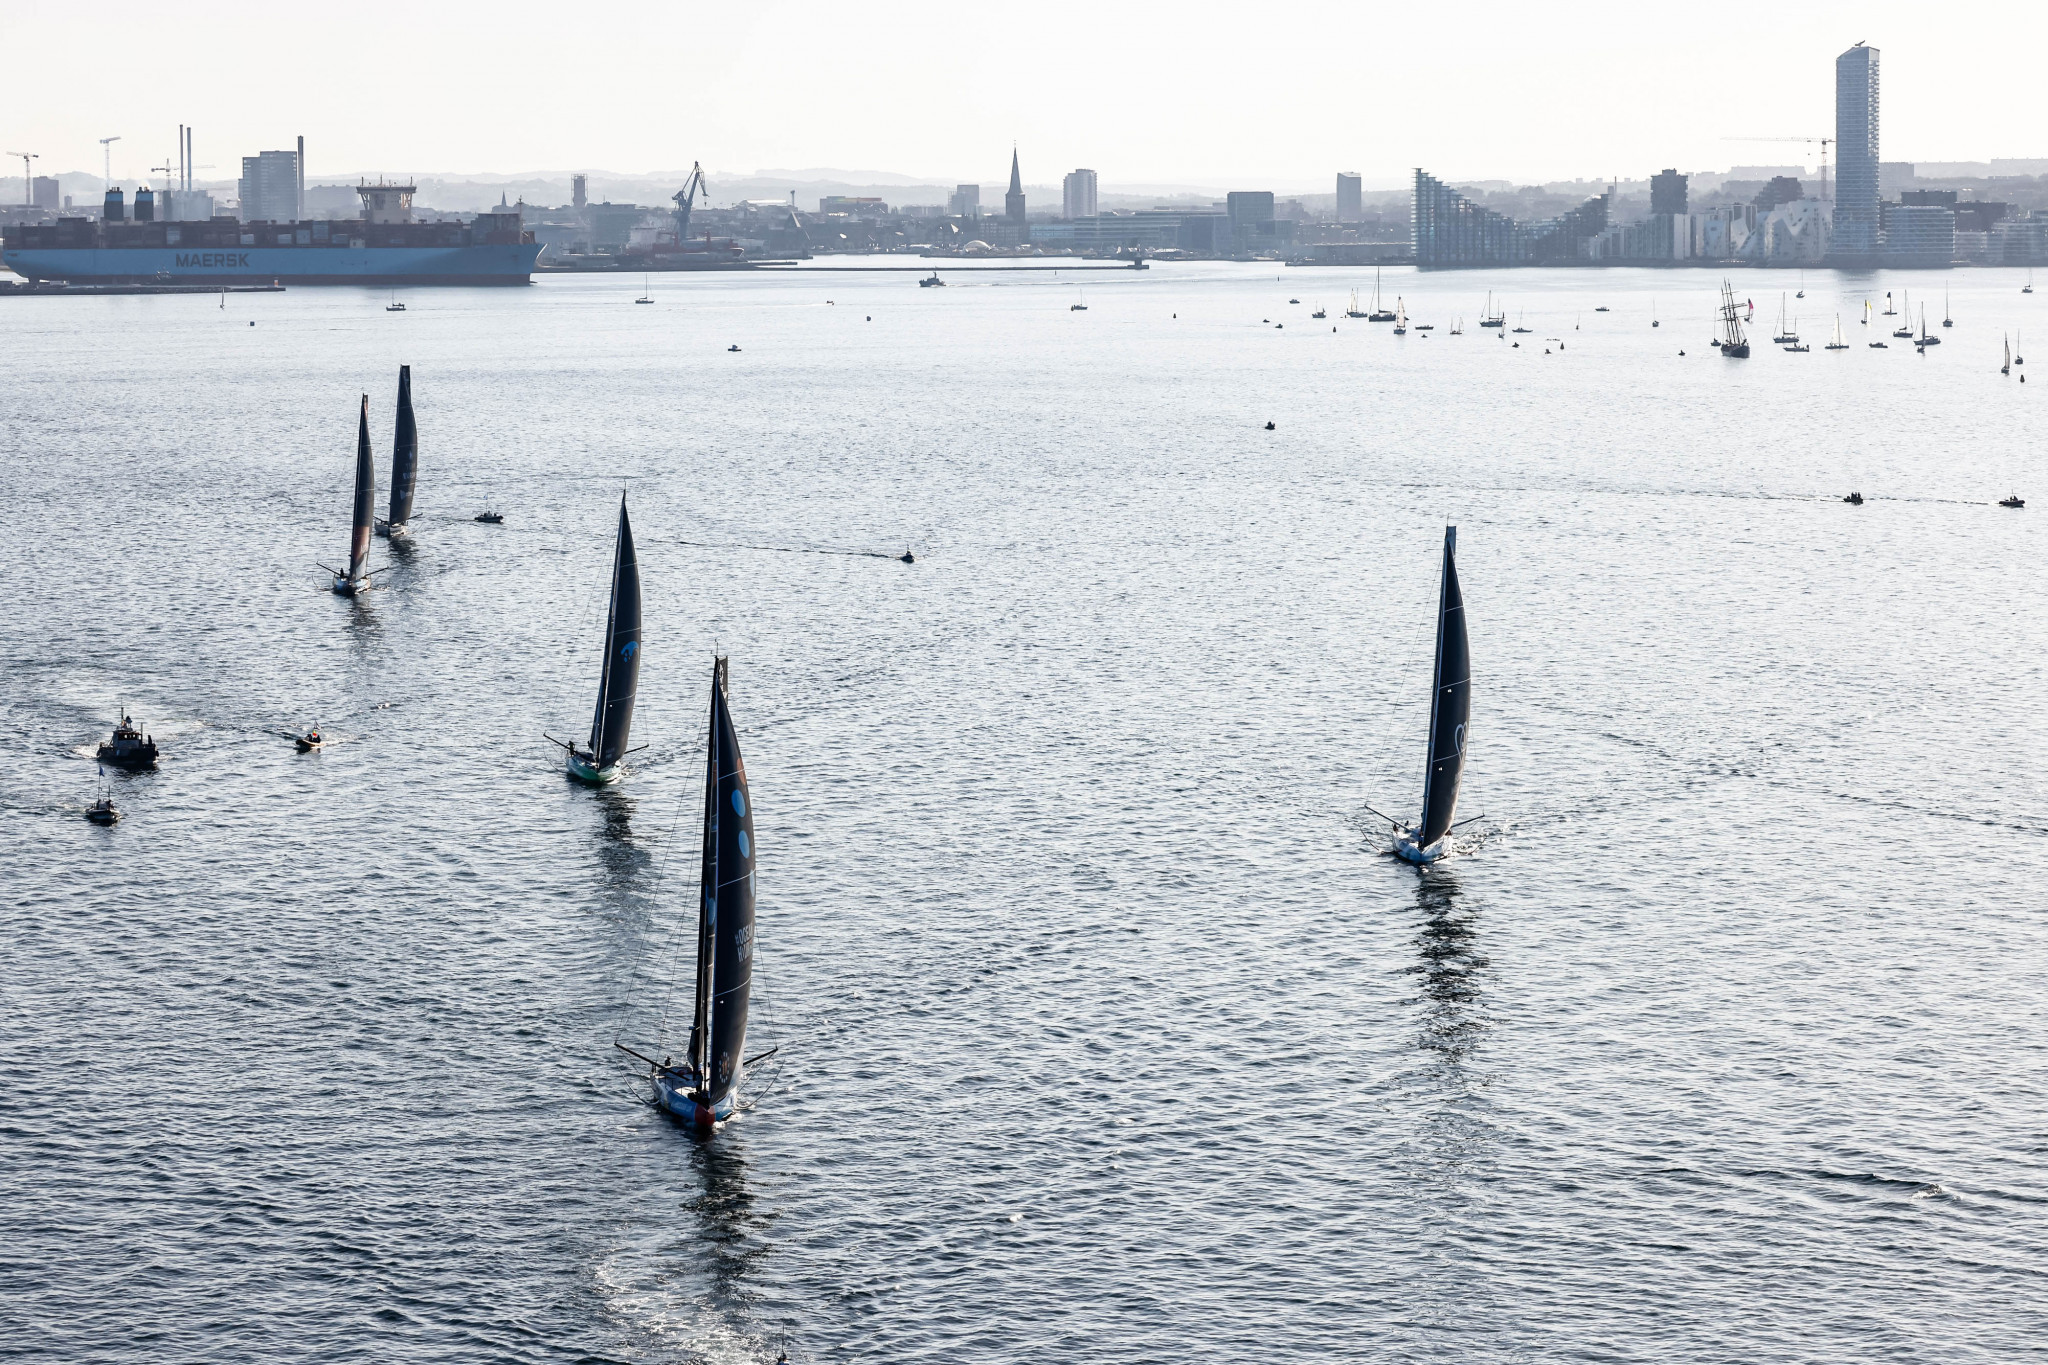 VO65 and IMOCA crews departed Aarhus in Denmark for The Hague in The Netherlands for the sixth leg of The Ocean Race ©The Ocean Race